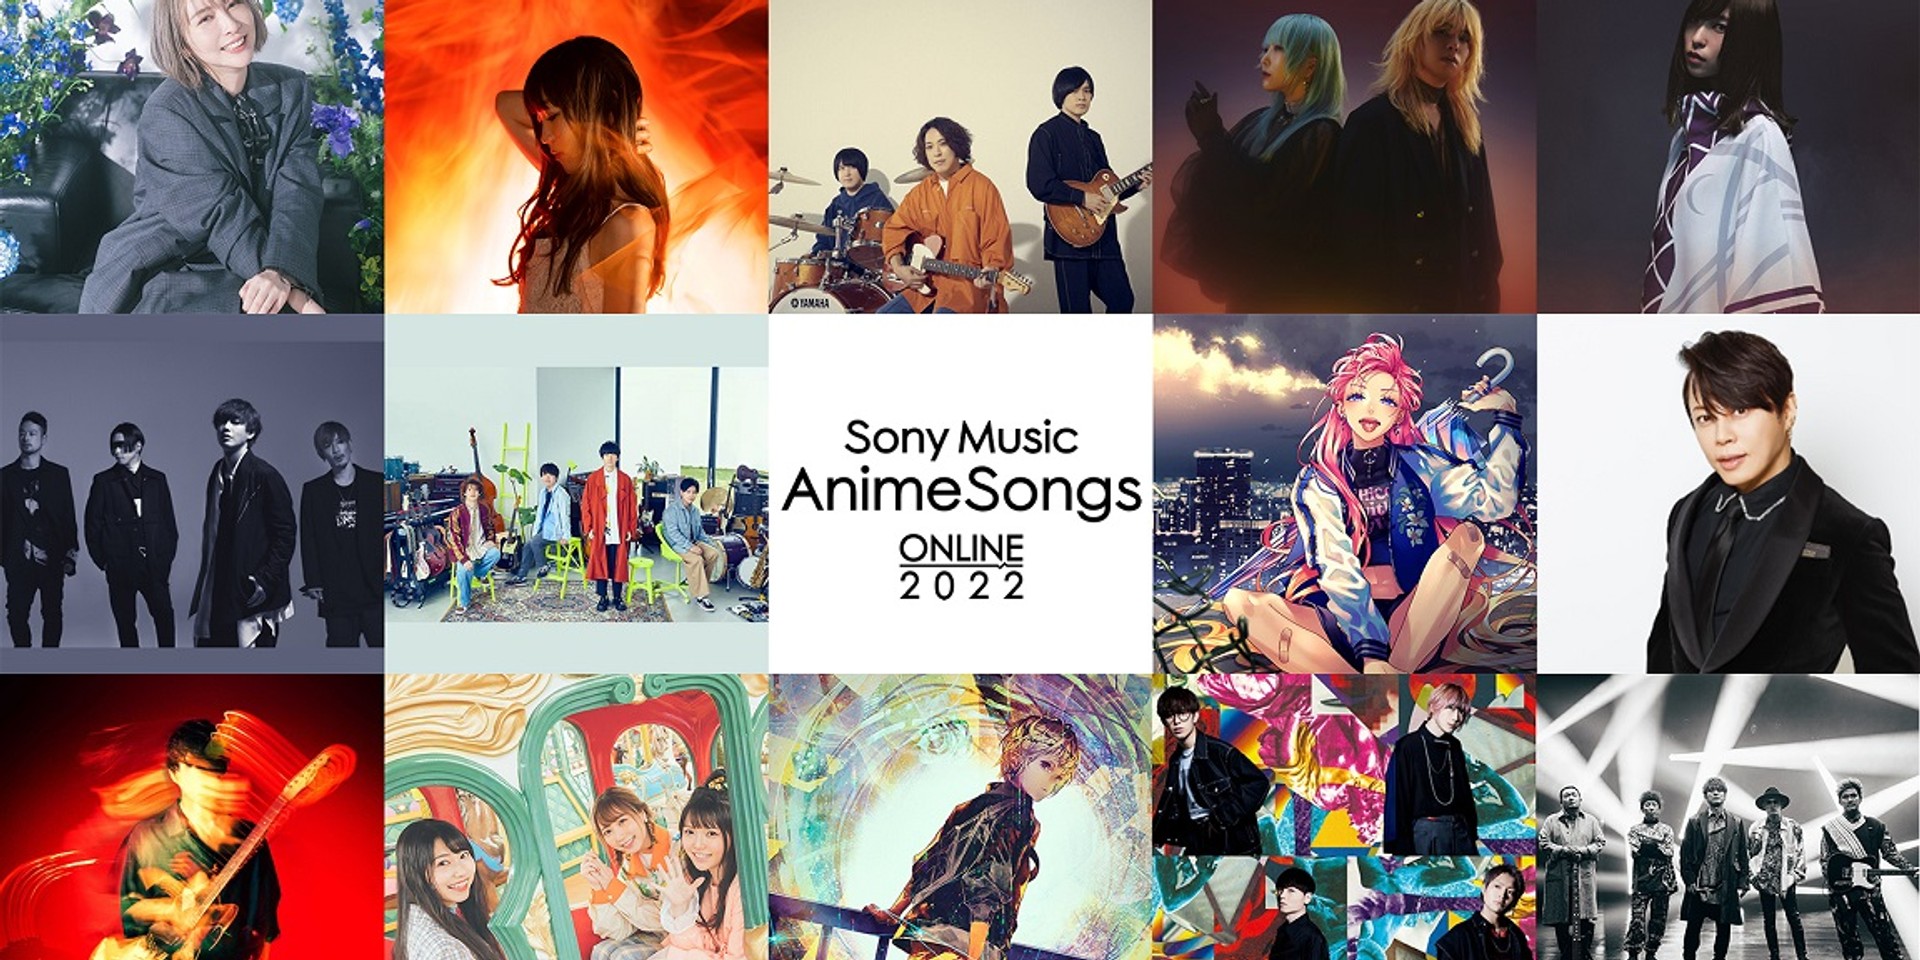 Sony Music Animesongs Online 22 To Feature 14 Performances By